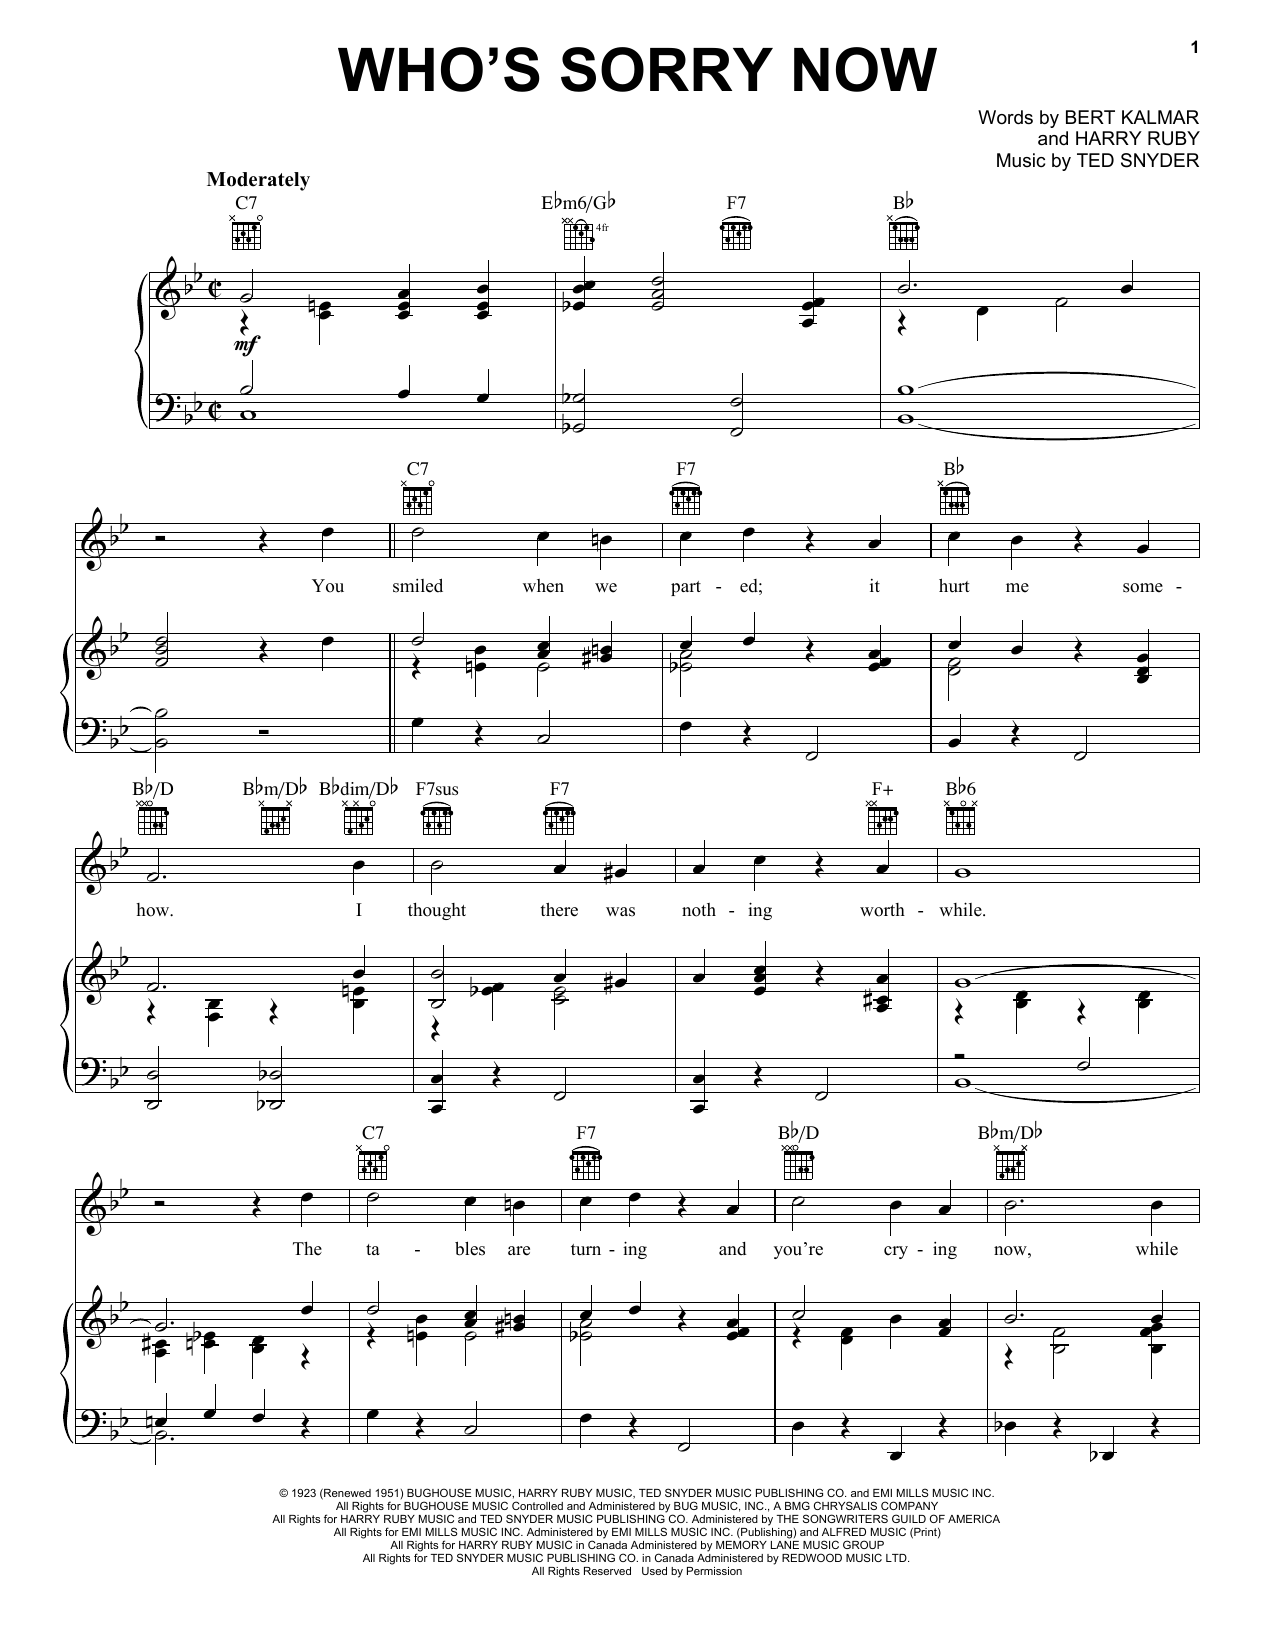 Connie Francis Who's Sorry Now sheet music notes and chords. Download Printable PDF.